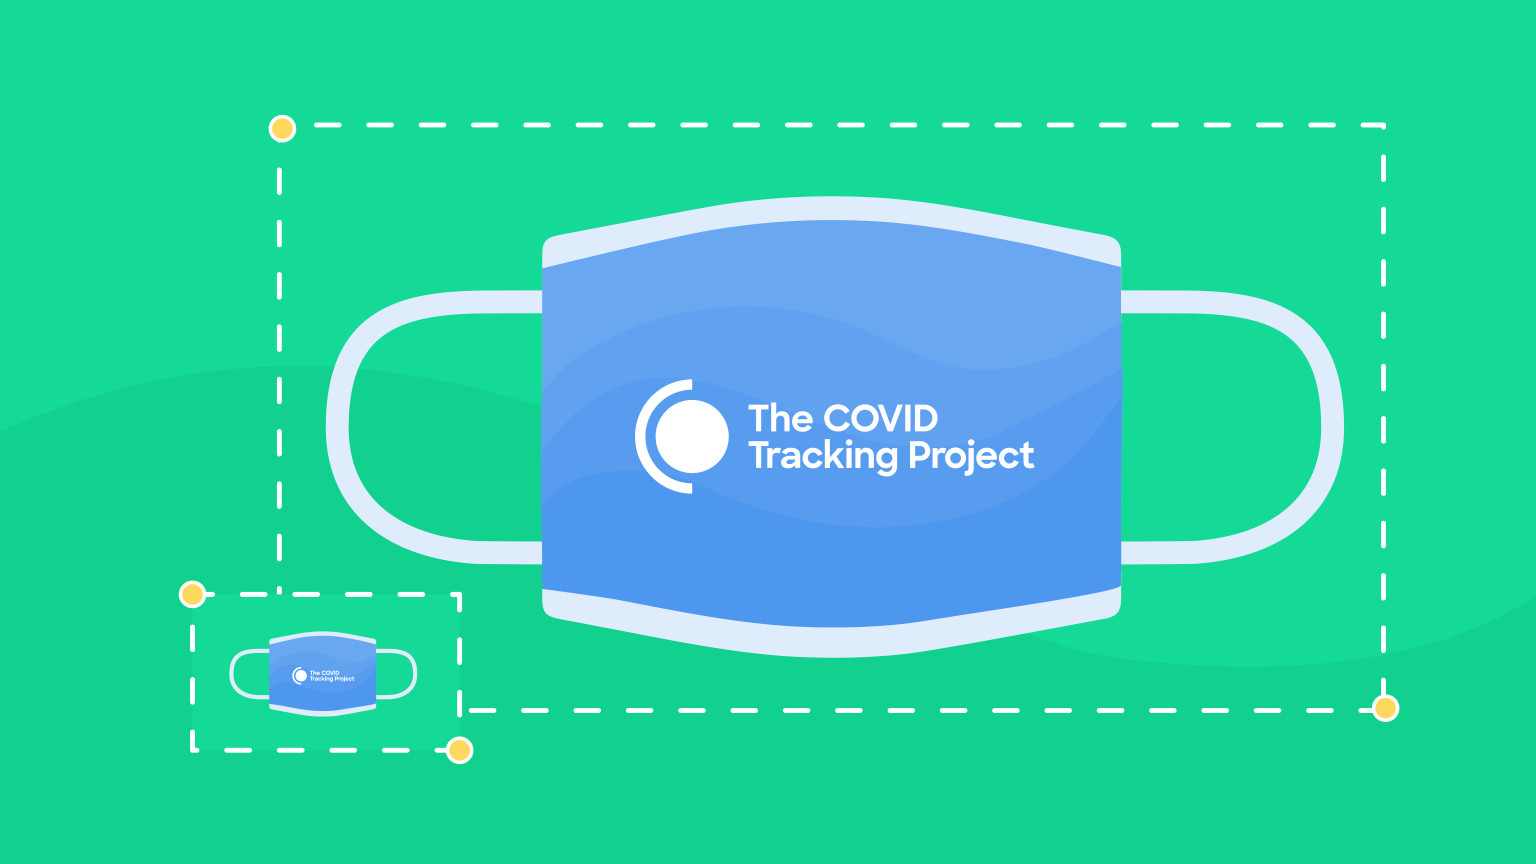 An illustration of two surgical masks, one smaller one larger, symbolizing how the Covid Tracking Project scaled to handle 200m API calls